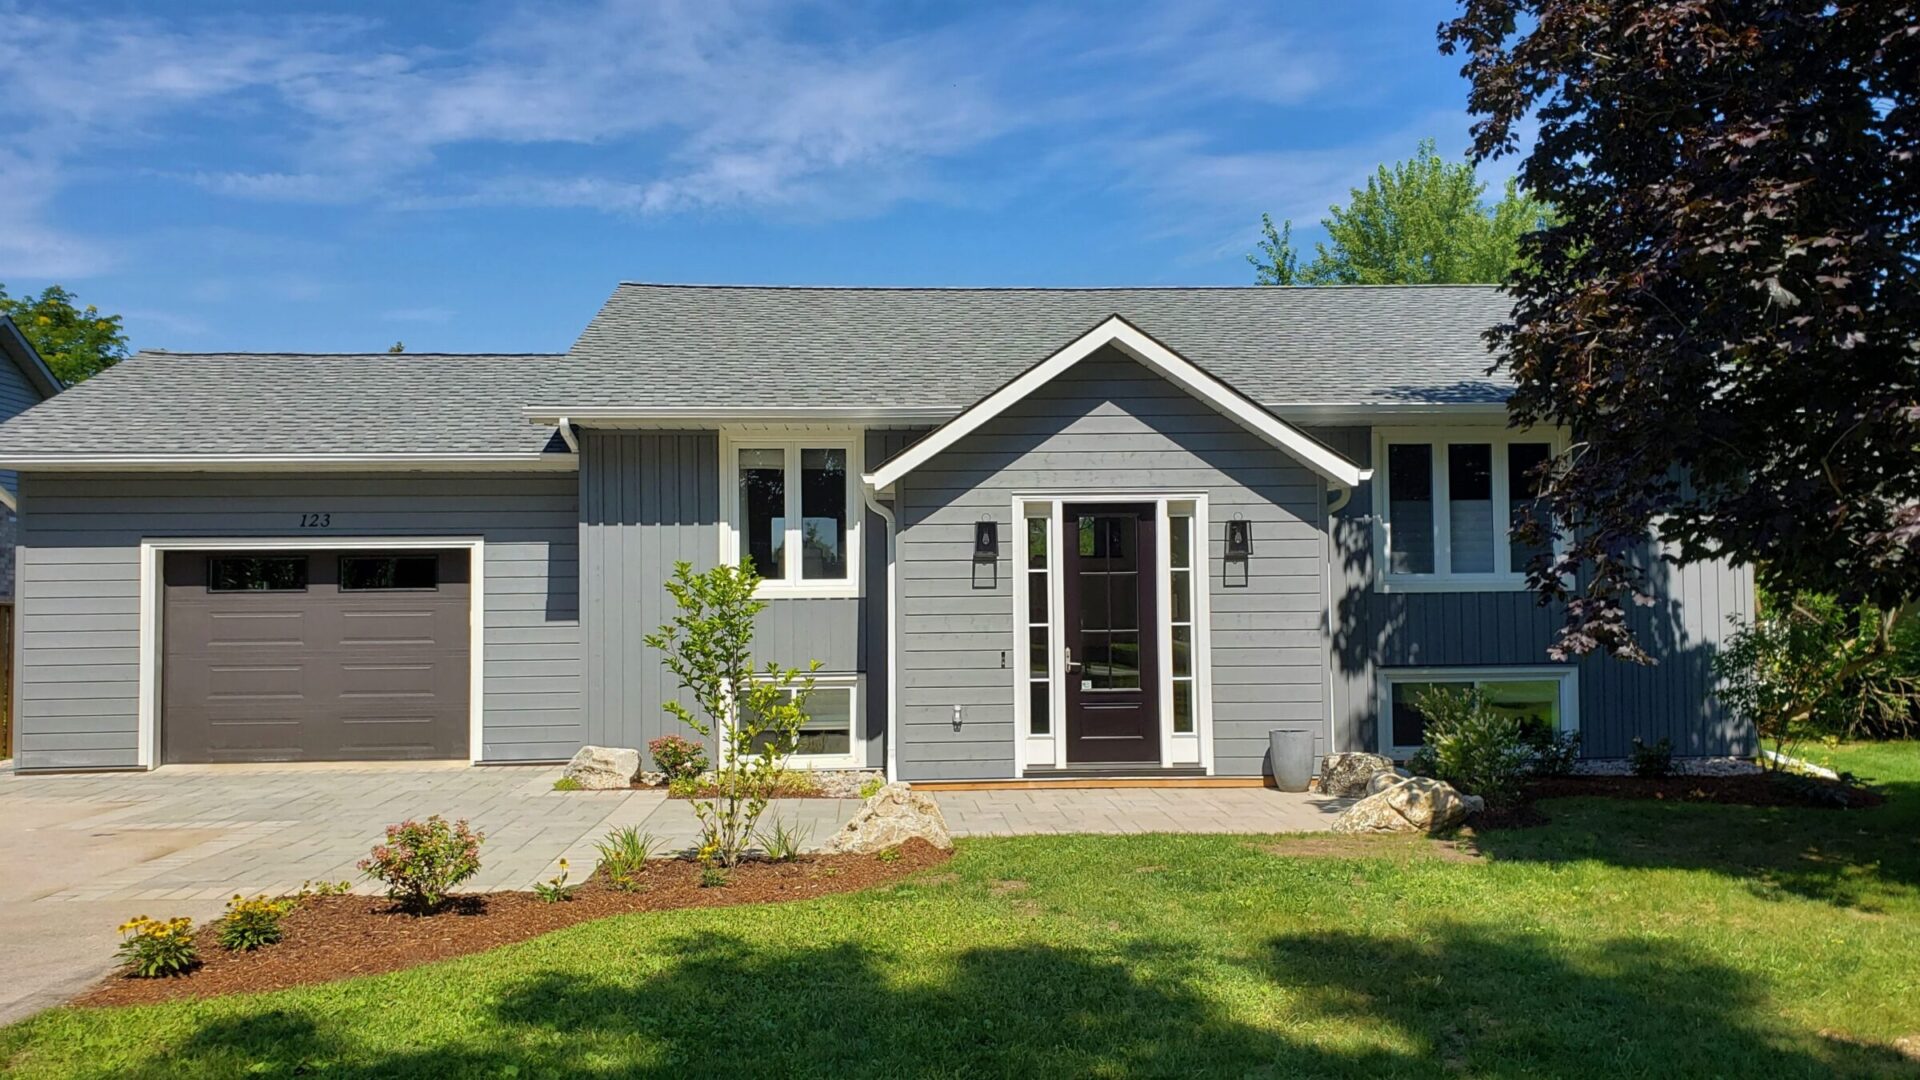 A single-story gray house with white trim, a garage, and a landscaped front yard under a clear blue sky. Trees and shrubs are partially visible.